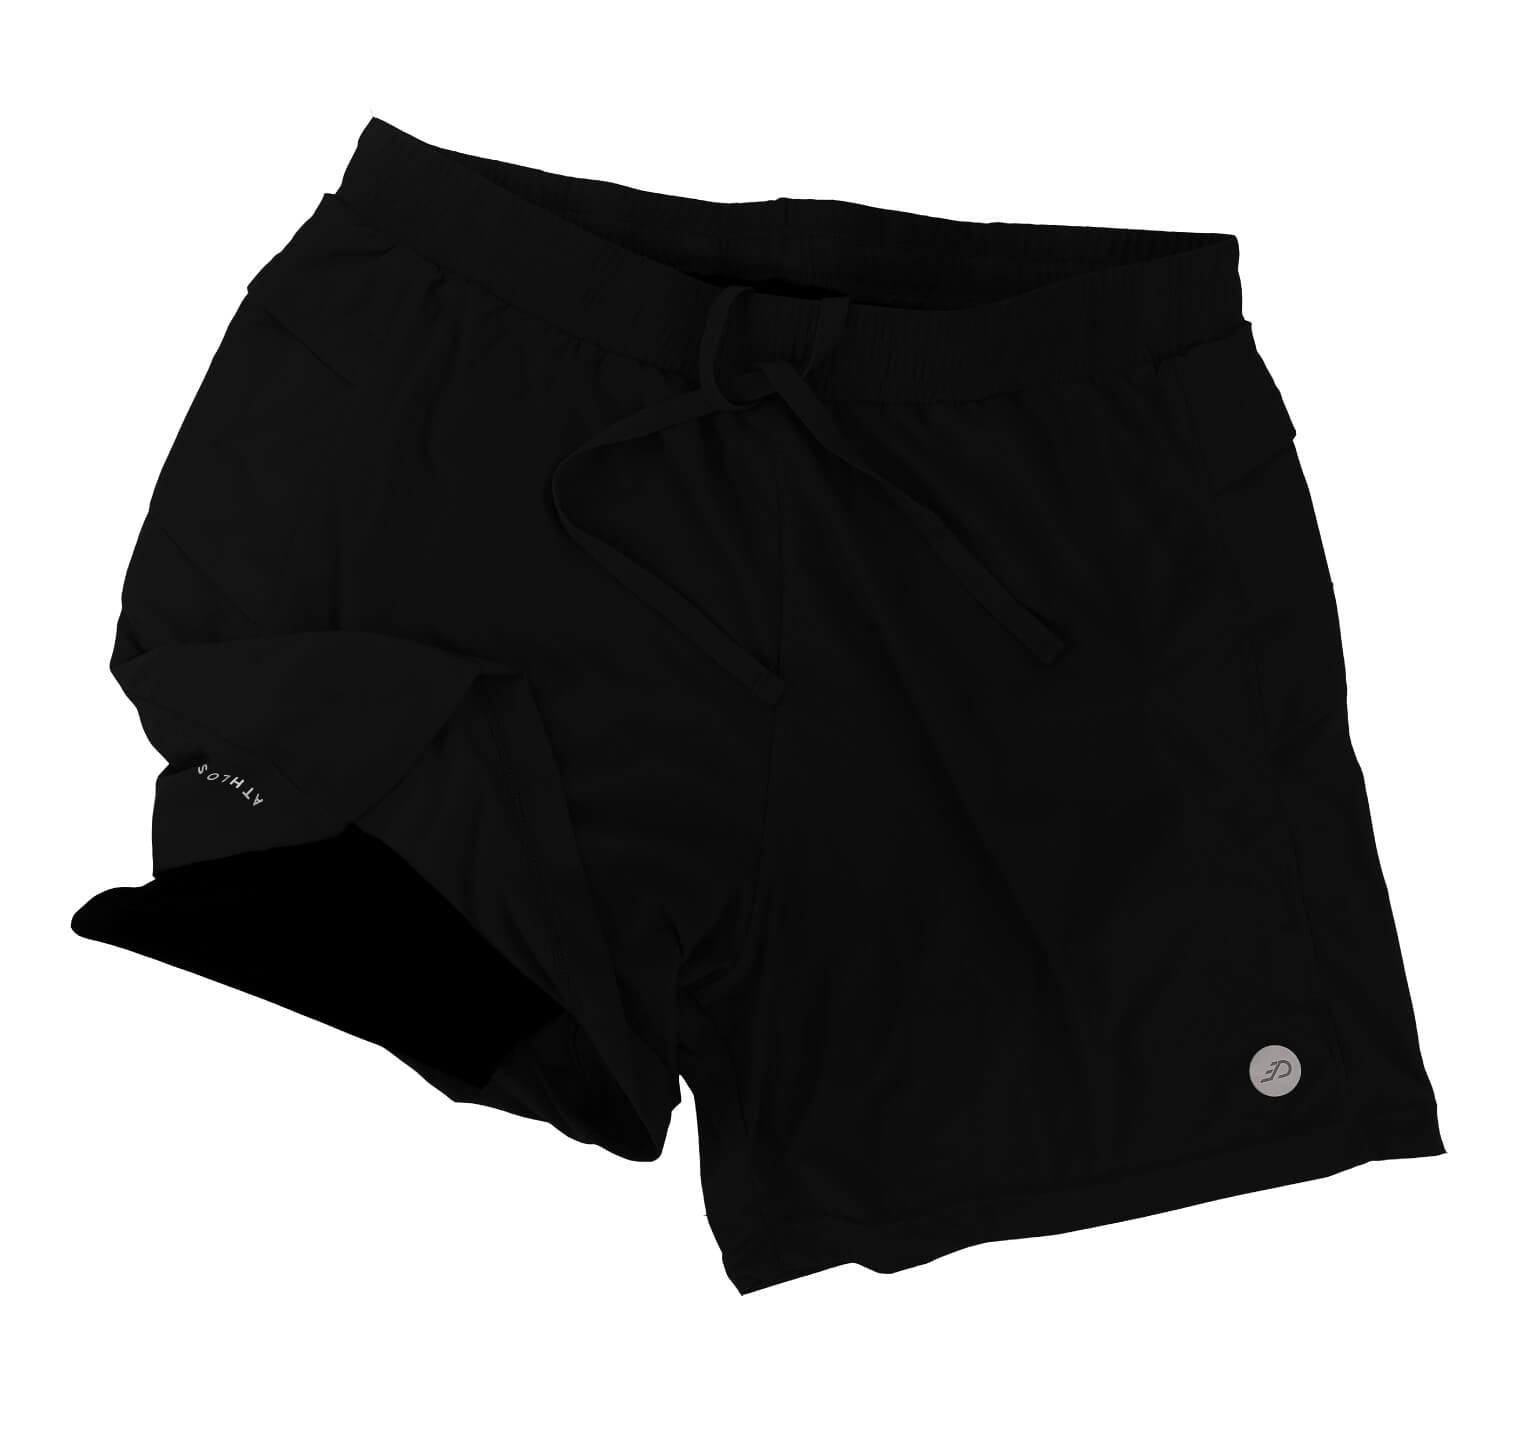  GYAUOLOP Love Horse Men's Athletic Beach Shorts Flowy Casual  Cool Workout Running Basketball Beach Gym Black Short XS : Sports & Outdoors